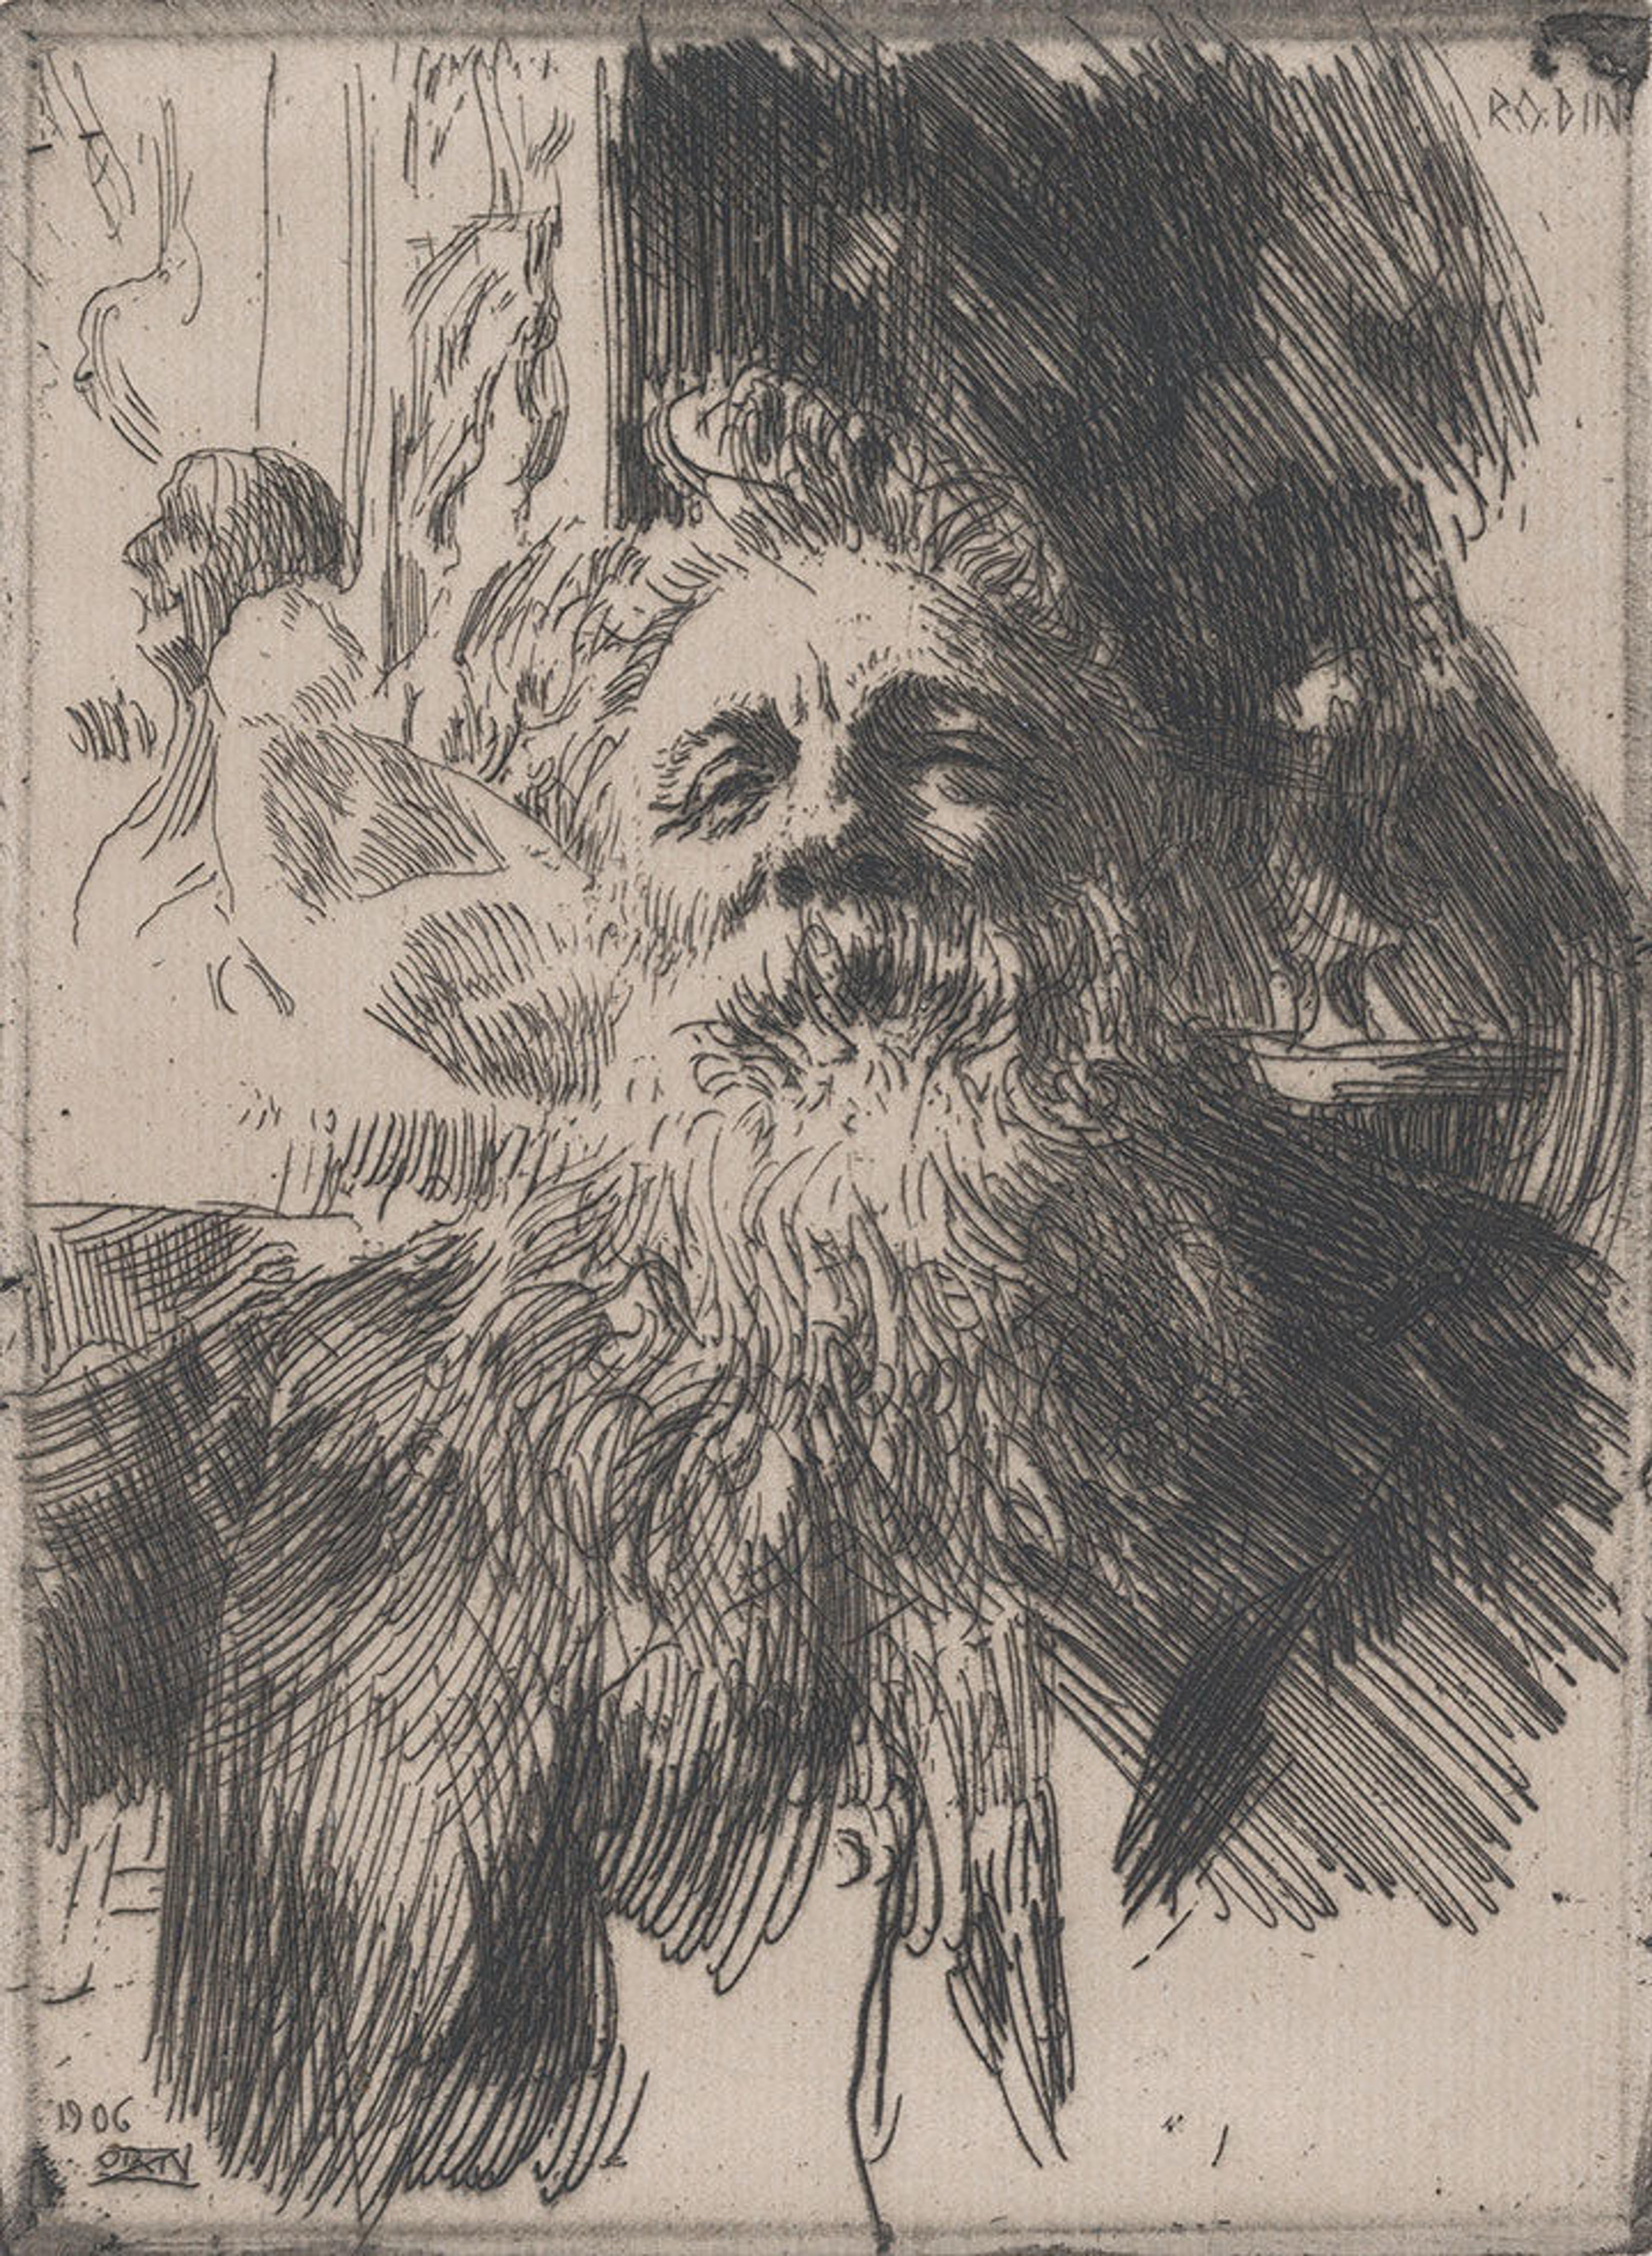 Anders Zorn etching of Auguste Rodin